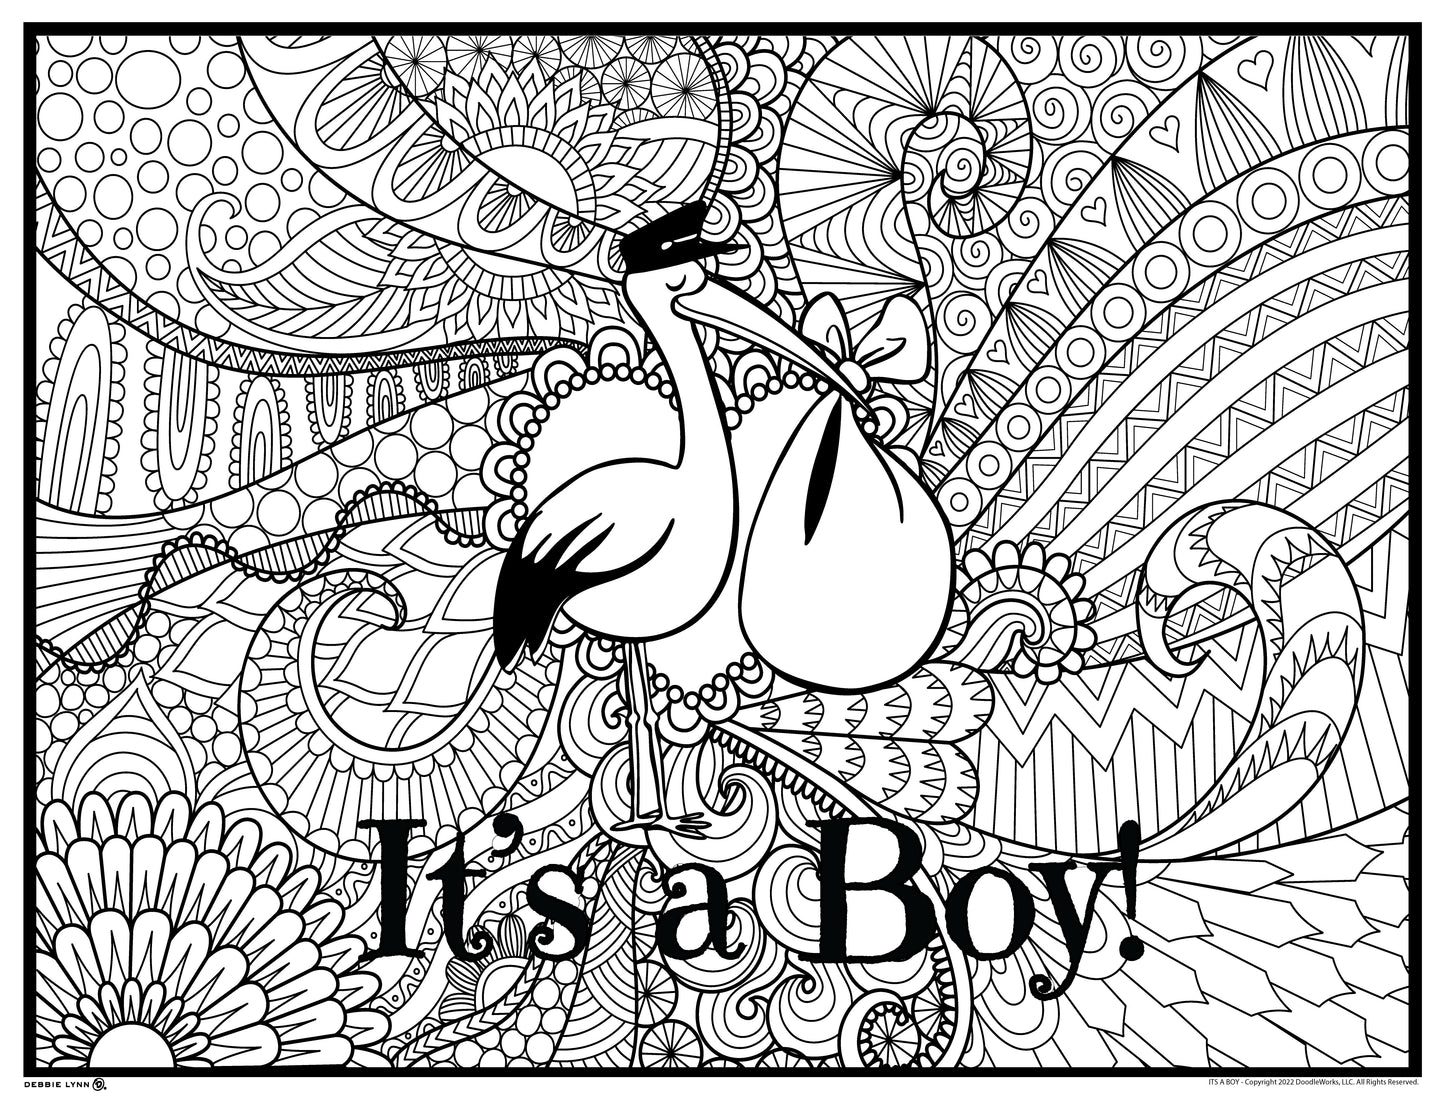 It's a Boy! Baby Announcement Personalized Giant Coloring Poster 46"x60"